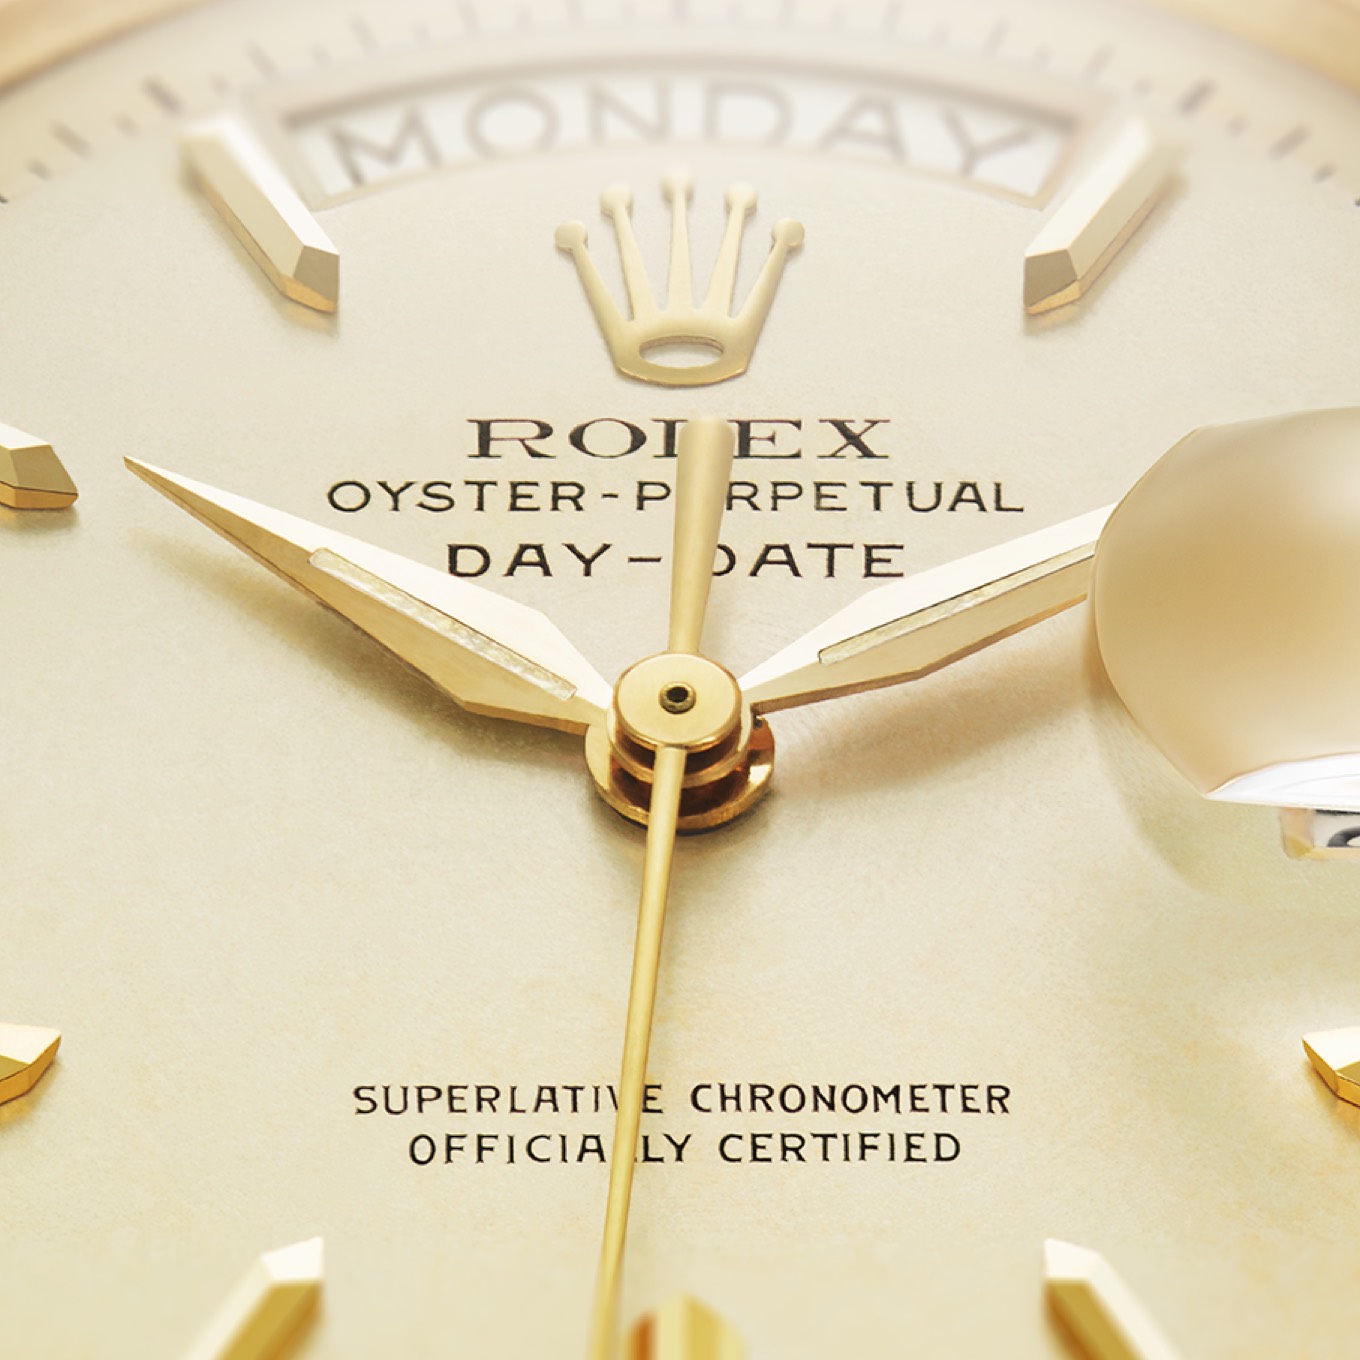 The Rolex approach to watchmaking